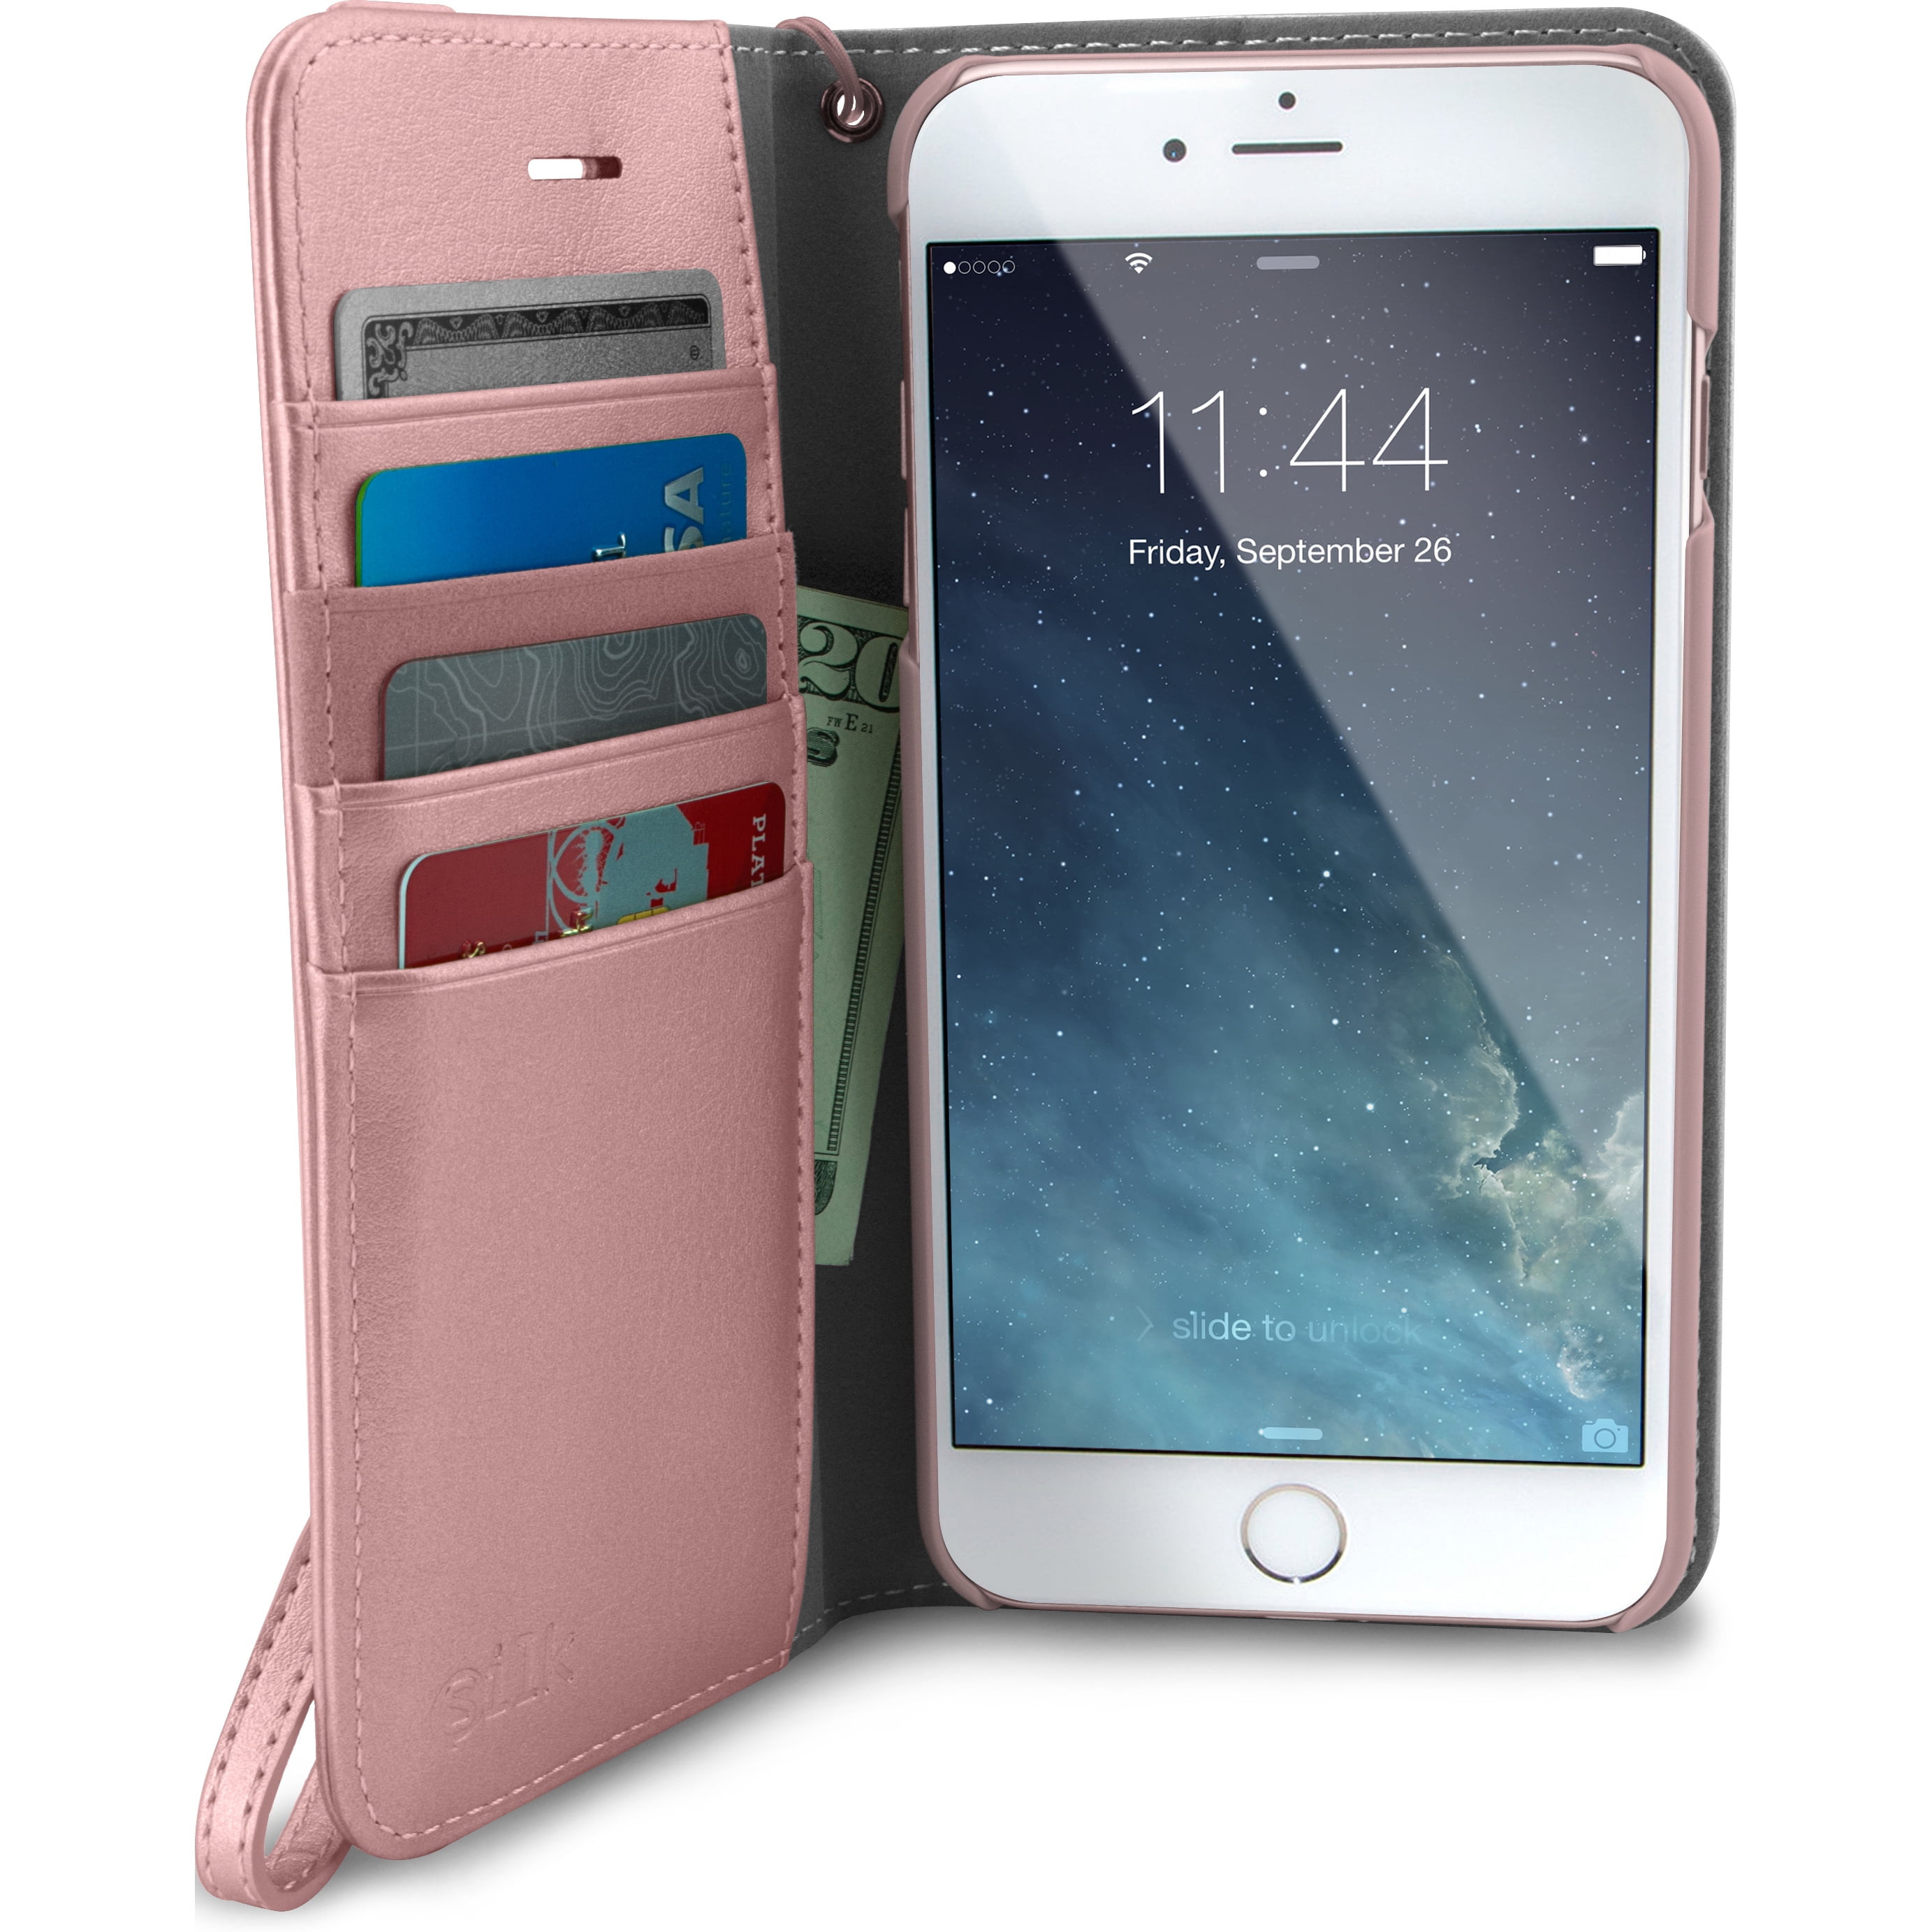 Throb historic heaven Smartish iPhone 8 Plus / 7 Plus Wallet Case - Keeper of The Things - [Silk]  Folio Wallet Synthetic Leather Portfolio Flip Credit Card Cover with  Kickstand - Rosé All Day - Walmart.com